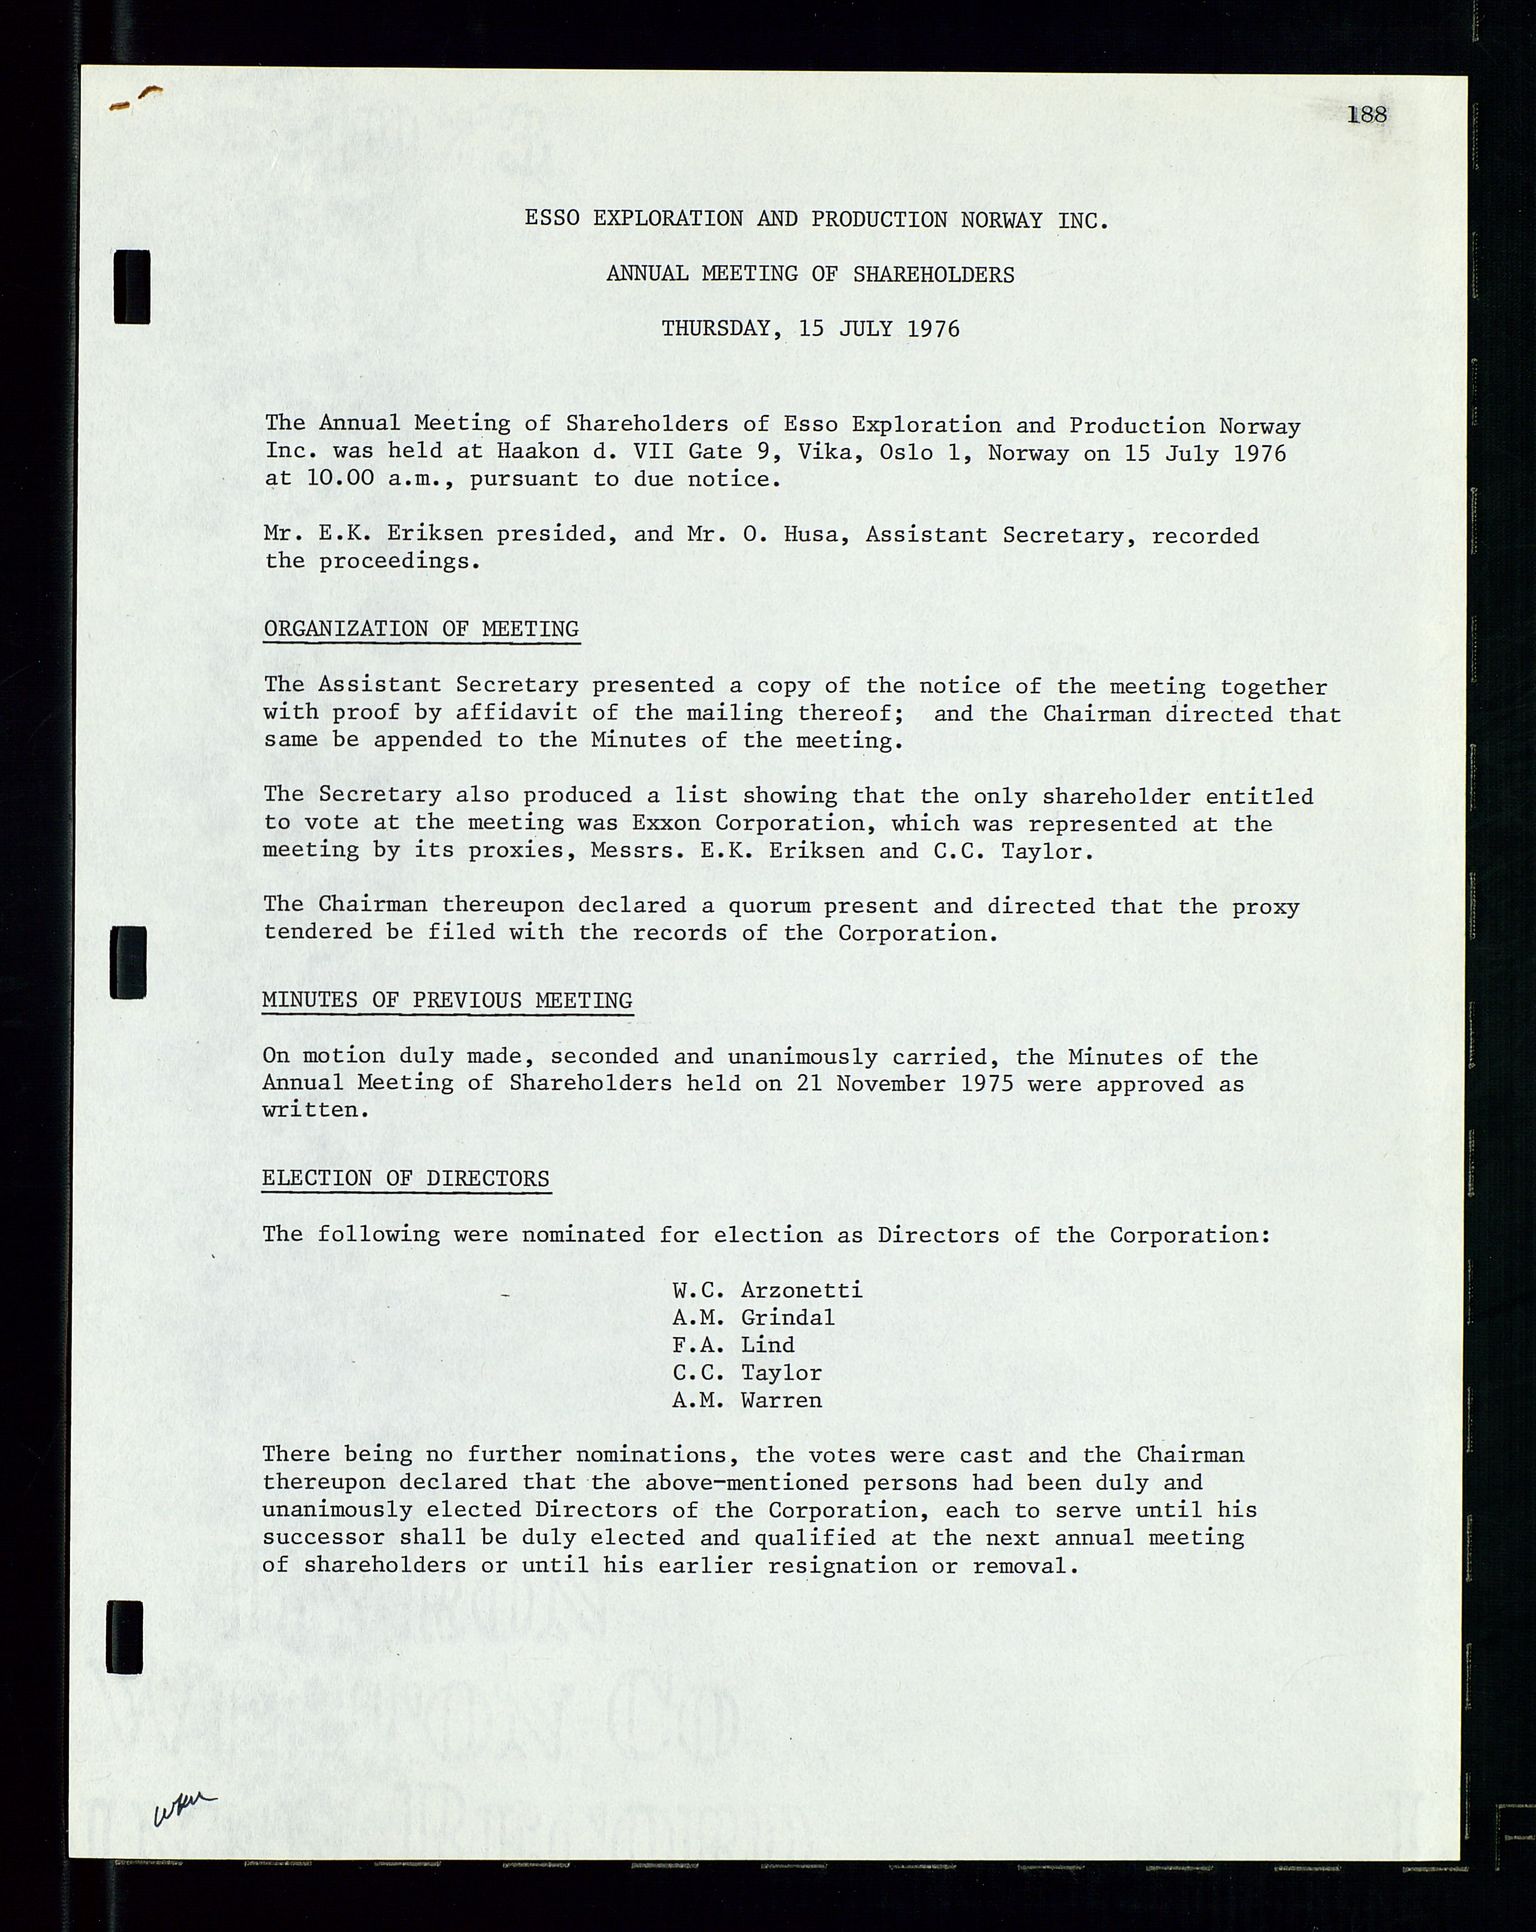 Pa 1512 - Esso Exploration and Production Norway Inc., SAST/A-101917/A/Aa/L0001/0002: Styredokumenter / Corporate records, Board meeting minutes, Agreements, Stocholder meetings, 1975-1979, s. 31